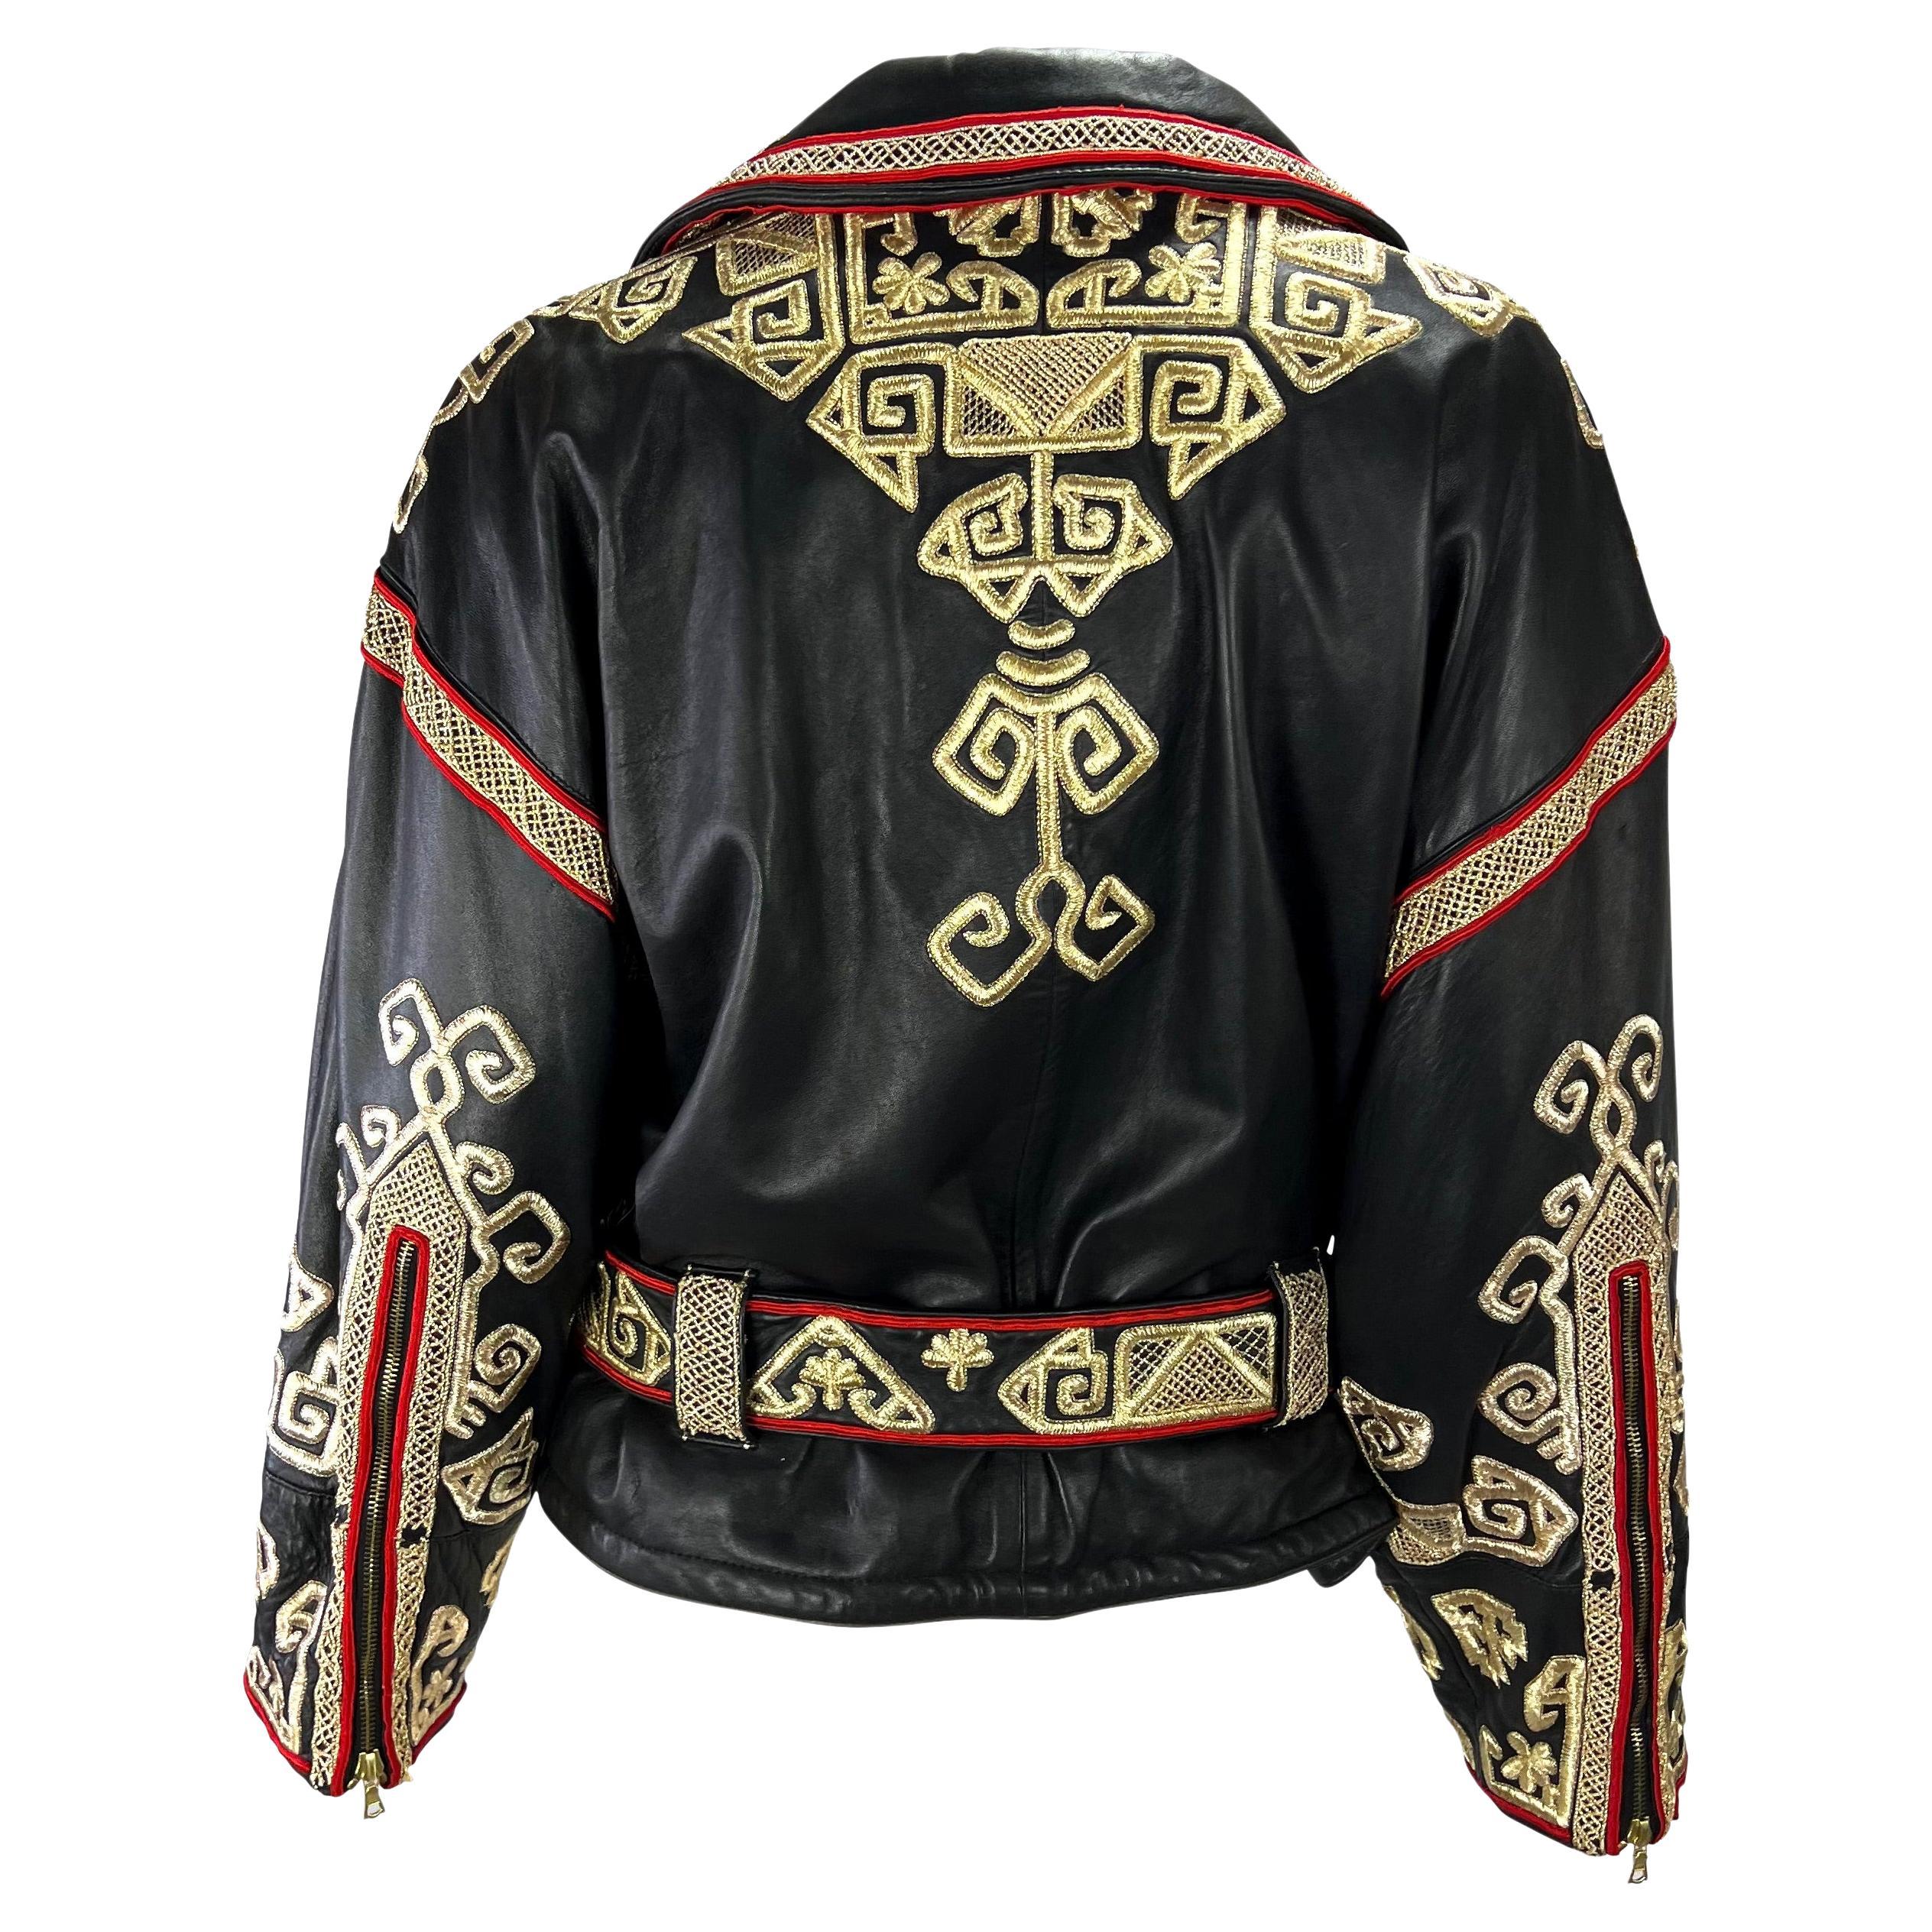 F/W 1992 Valentino Garavani Runway Gold Embroidered Leather Biker Jacket In Excellent Condition For Sale In West Hollywood, CA